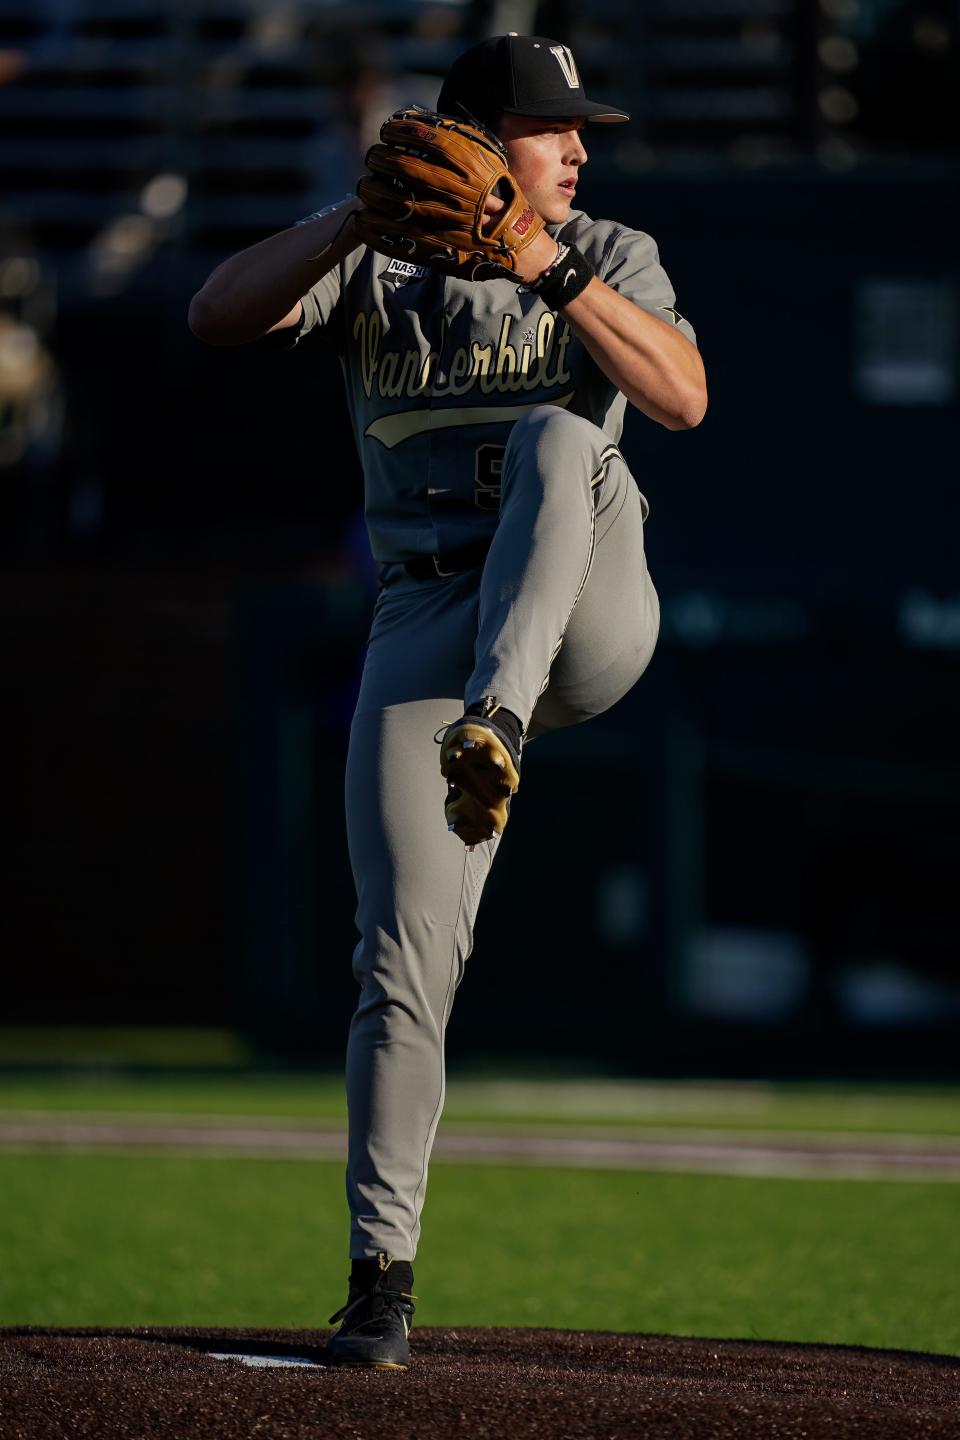 Vanderbilt pitcher Greysen Carter (98) pitches against Georgia State during the first inning at Hawkins Field in Nashville, Tenn., Tuesday, May 2, 2023.